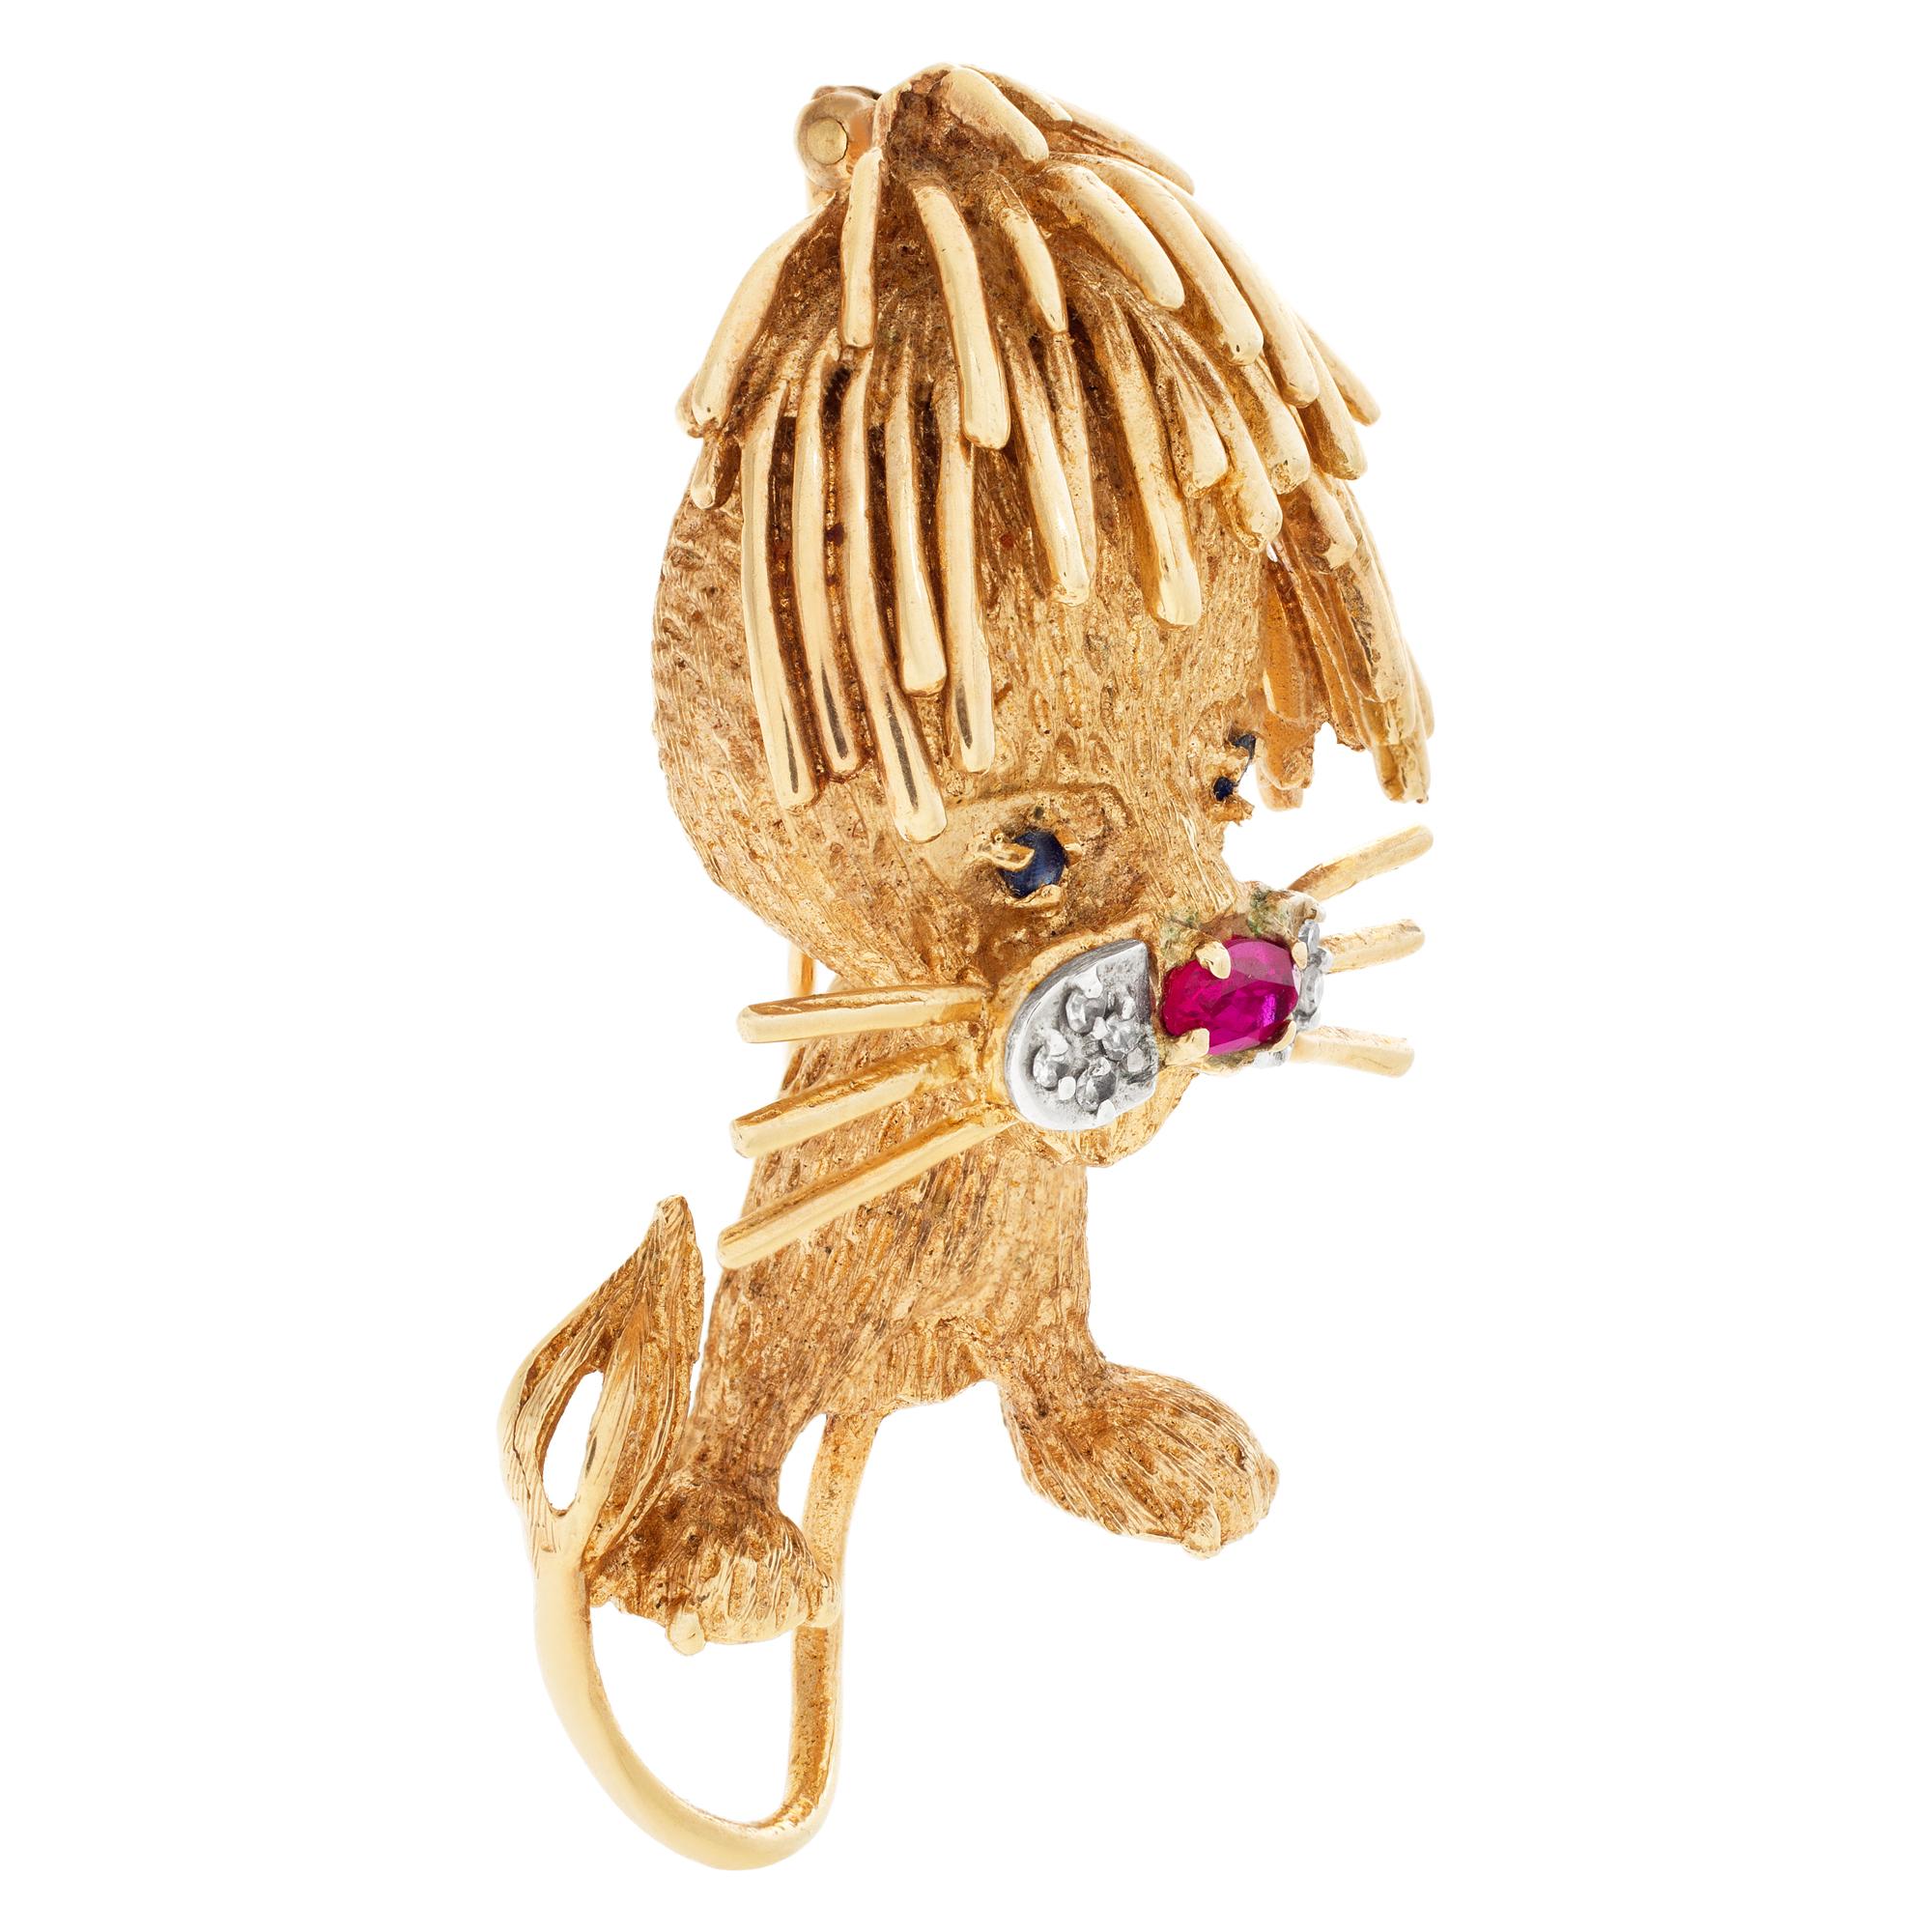 Fancy lion cub brooch in 14k gold with an oval ruby nose, diamond whiskers and emerald eyes. Dimensions 44.5 mm length x 26.5mm width.
